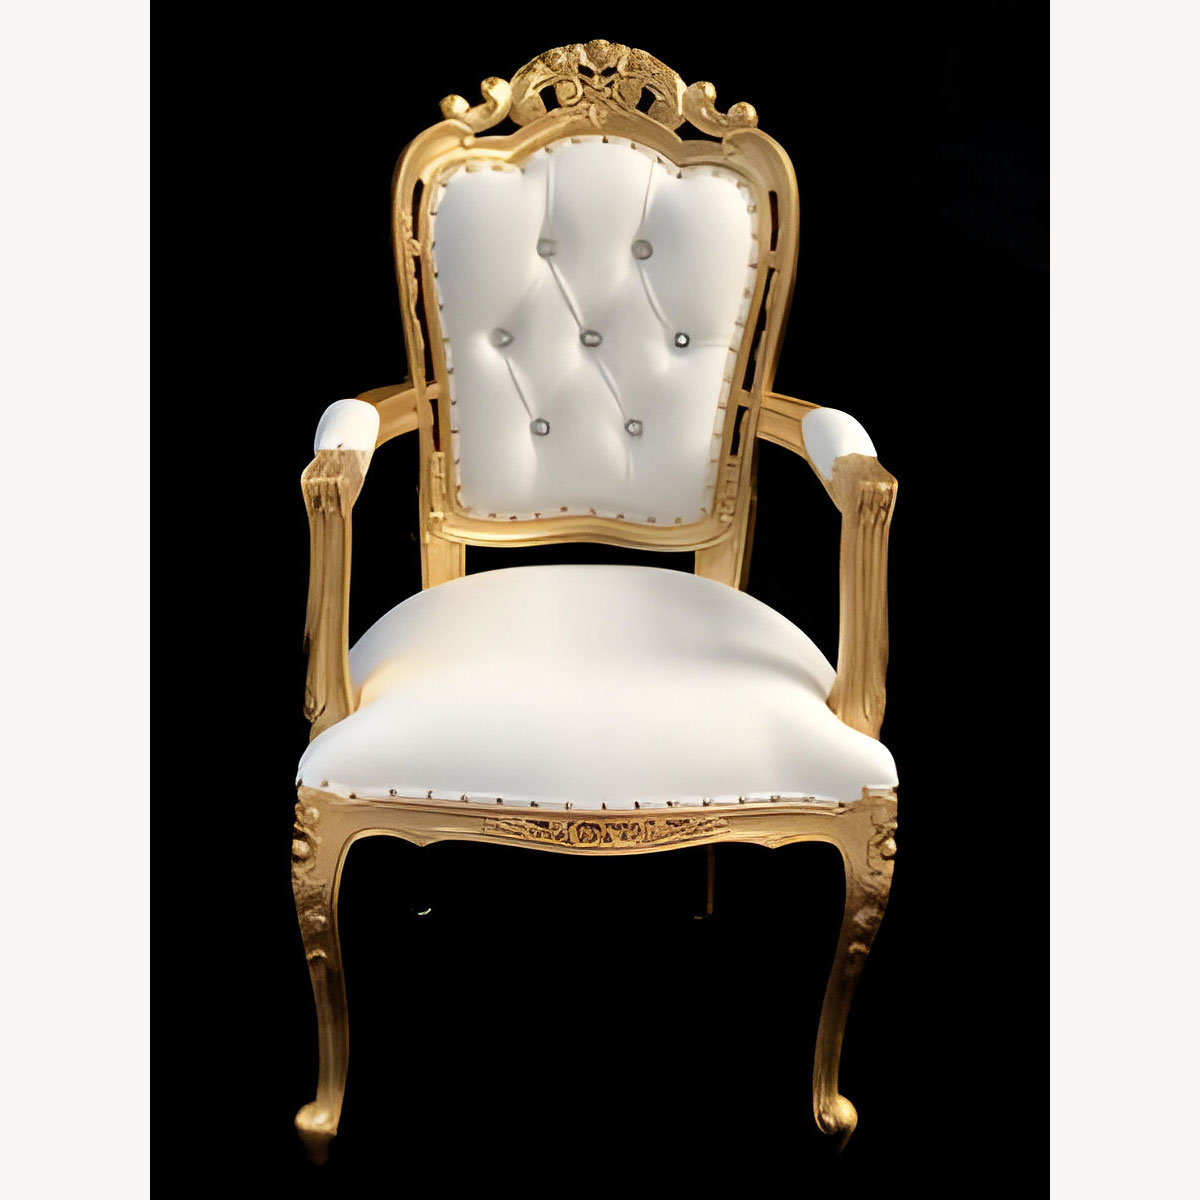 Hampshire Wedding Set With Gold Leaf Frames White Faux Leather With Crystals Sofa Plus 2 x Chairs As Shown All Matching 2 - Hampshire Barn Interiors - Hampshire Wedding Set With Gold Leaf Frames White Faux Leather With Crystals Sofa Plus 2 x Chairs As Shown All Matching -